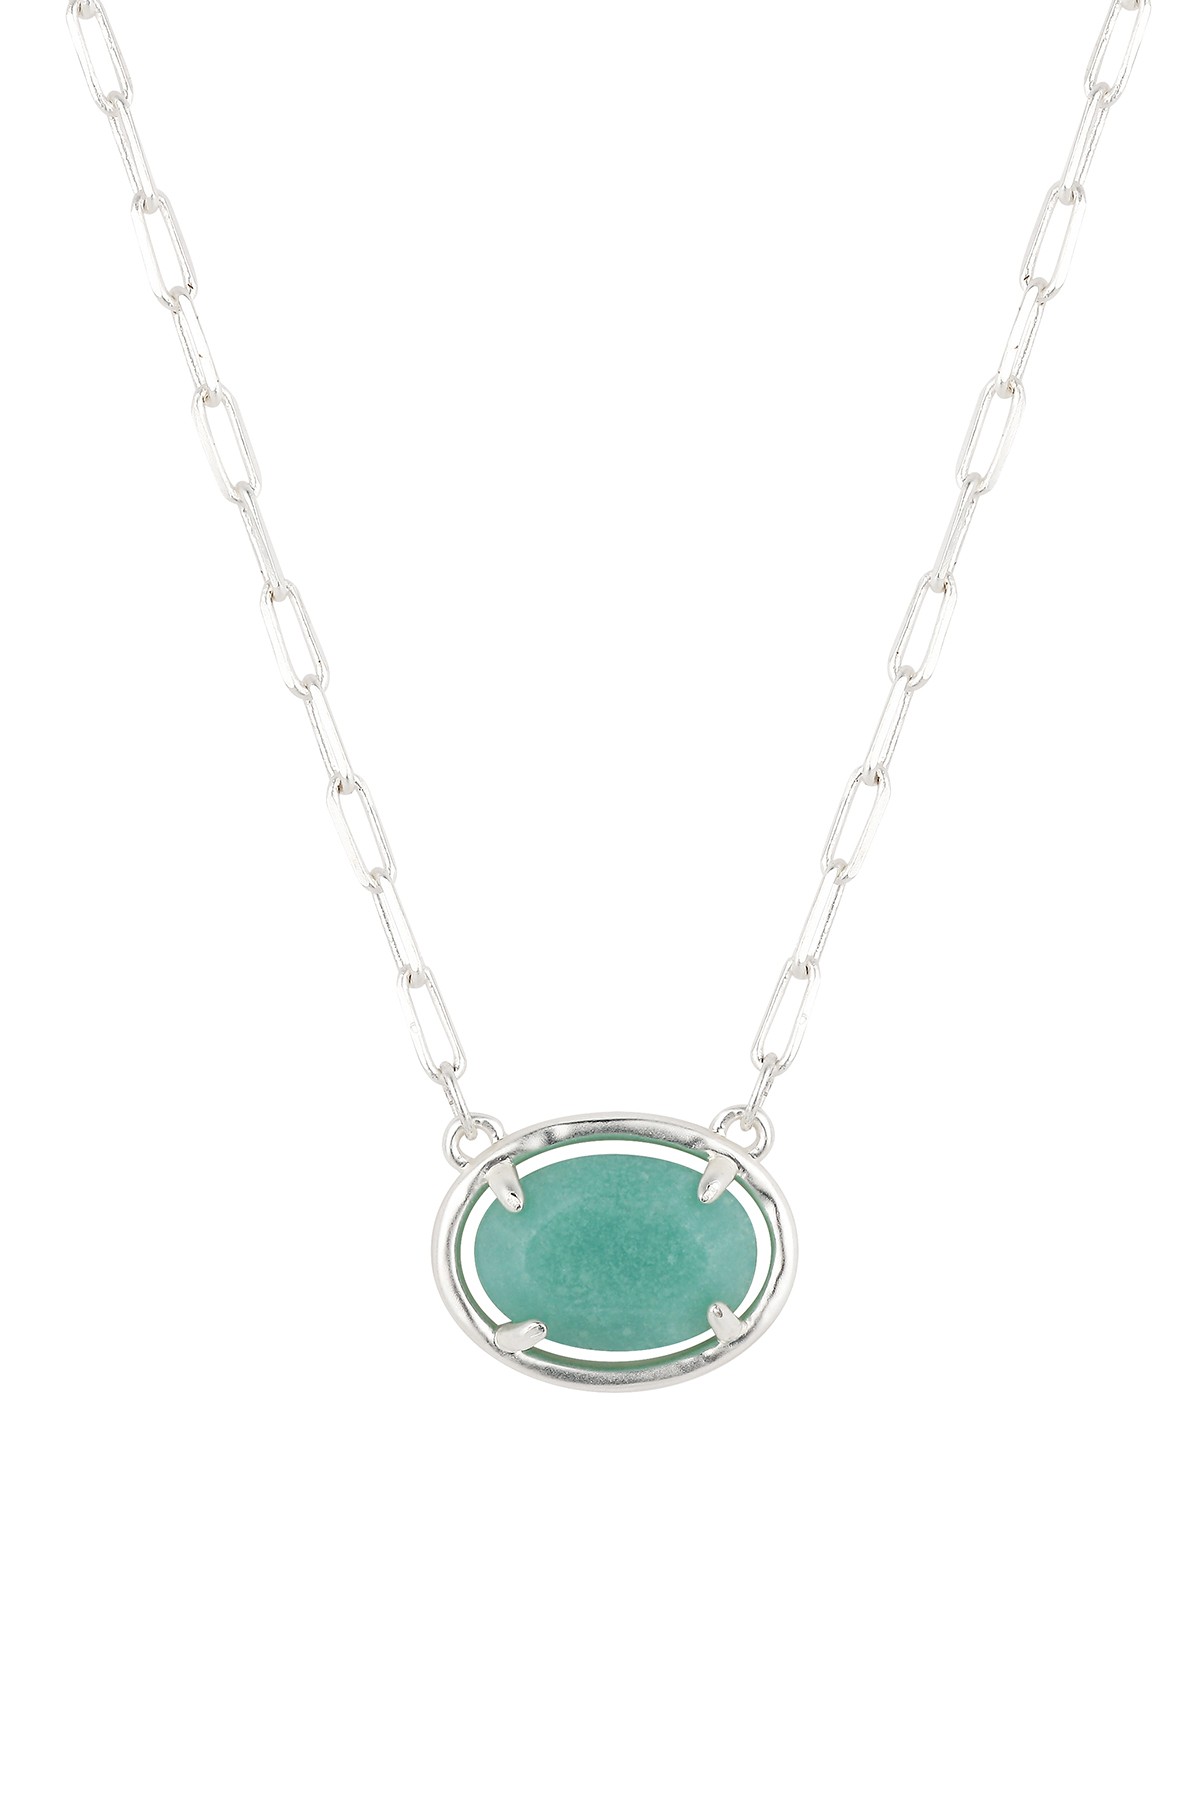 Amazonite Oval Stationed Stone Necklace with Paperlink Chain LA Rocks